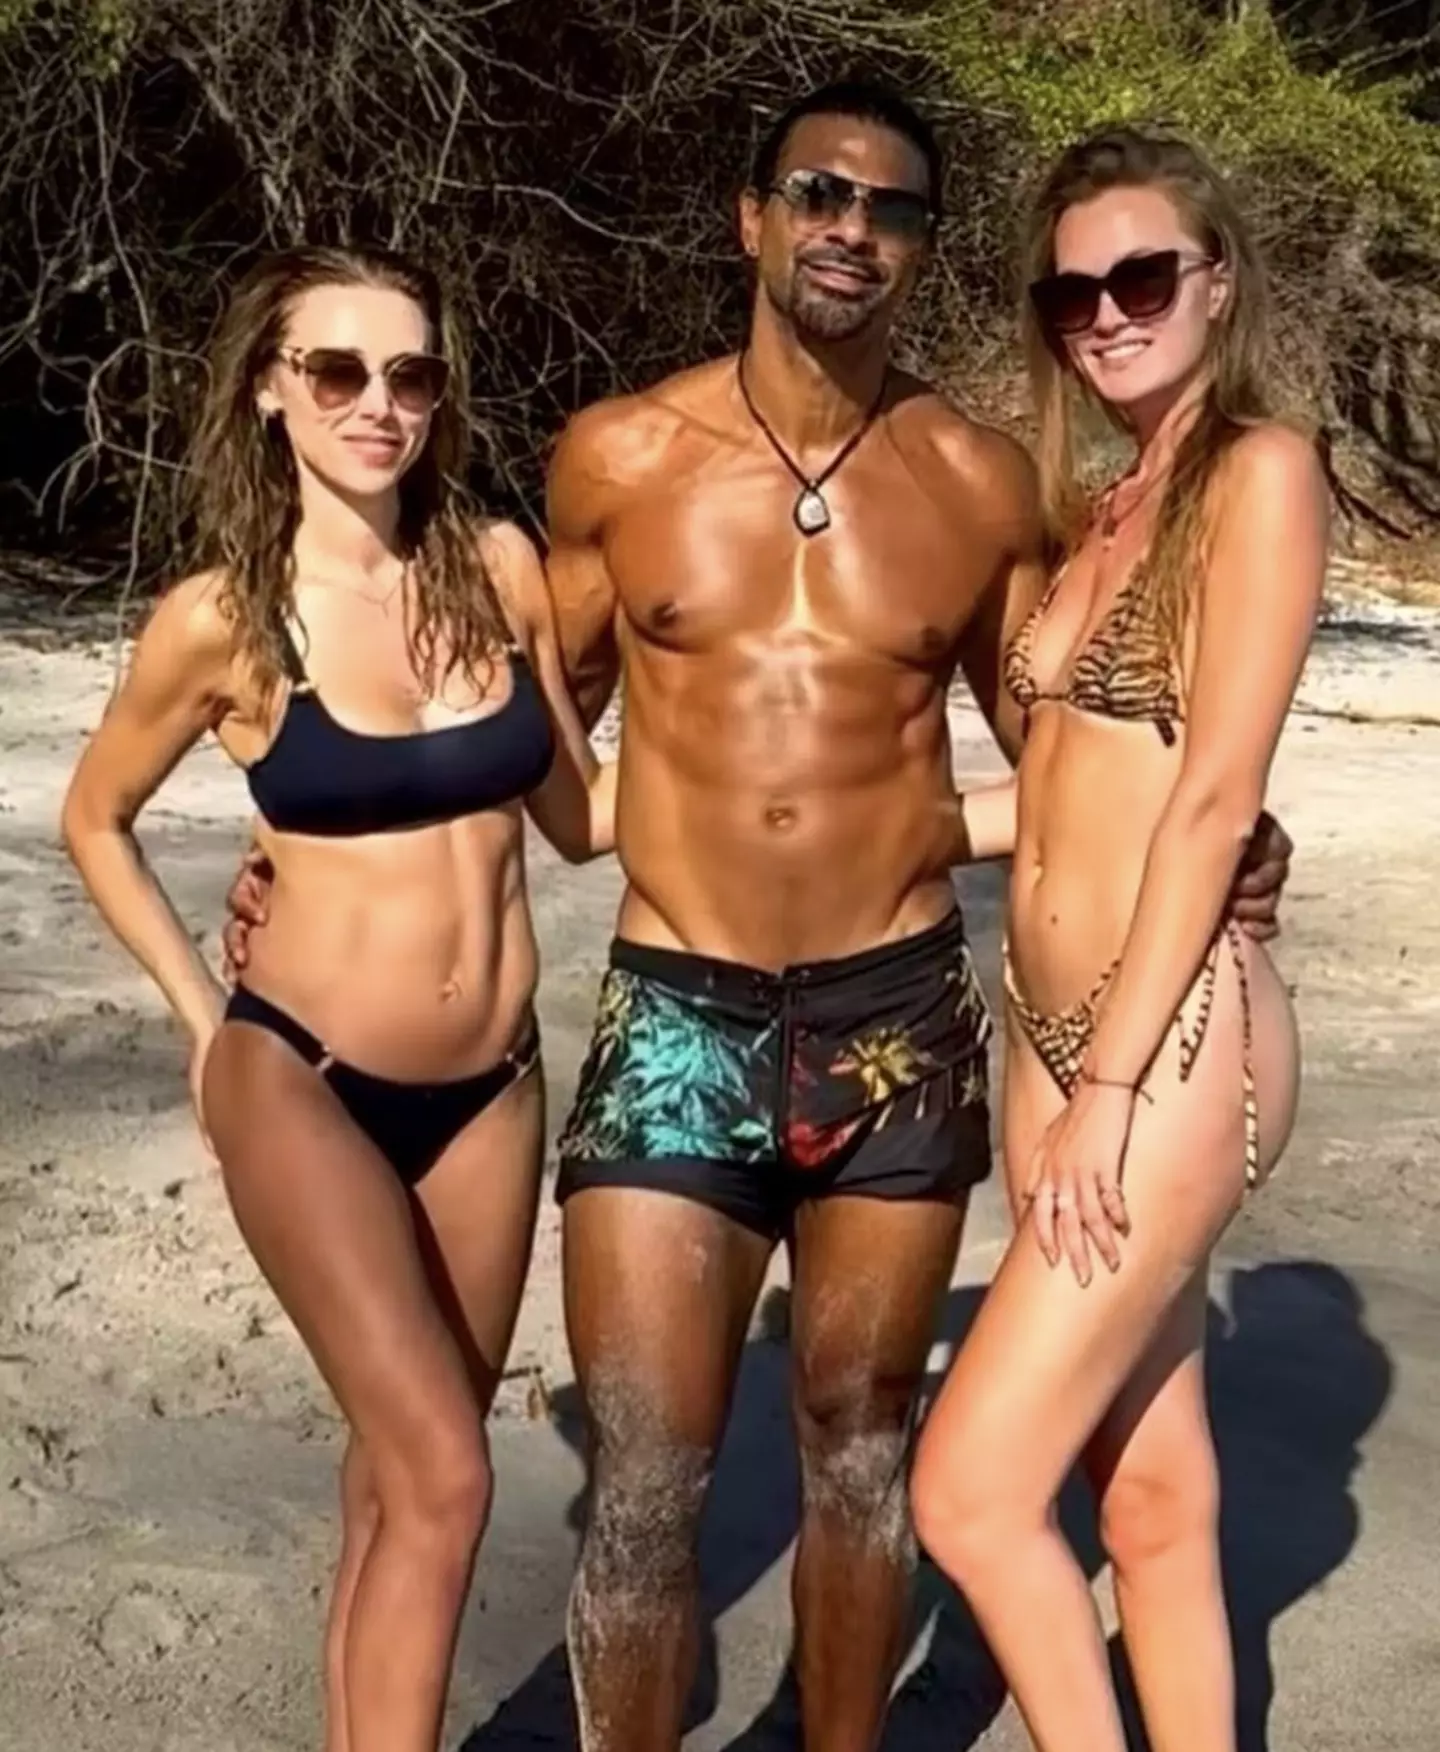 Haye wished the 'queens' a Happy Valentine's Day.